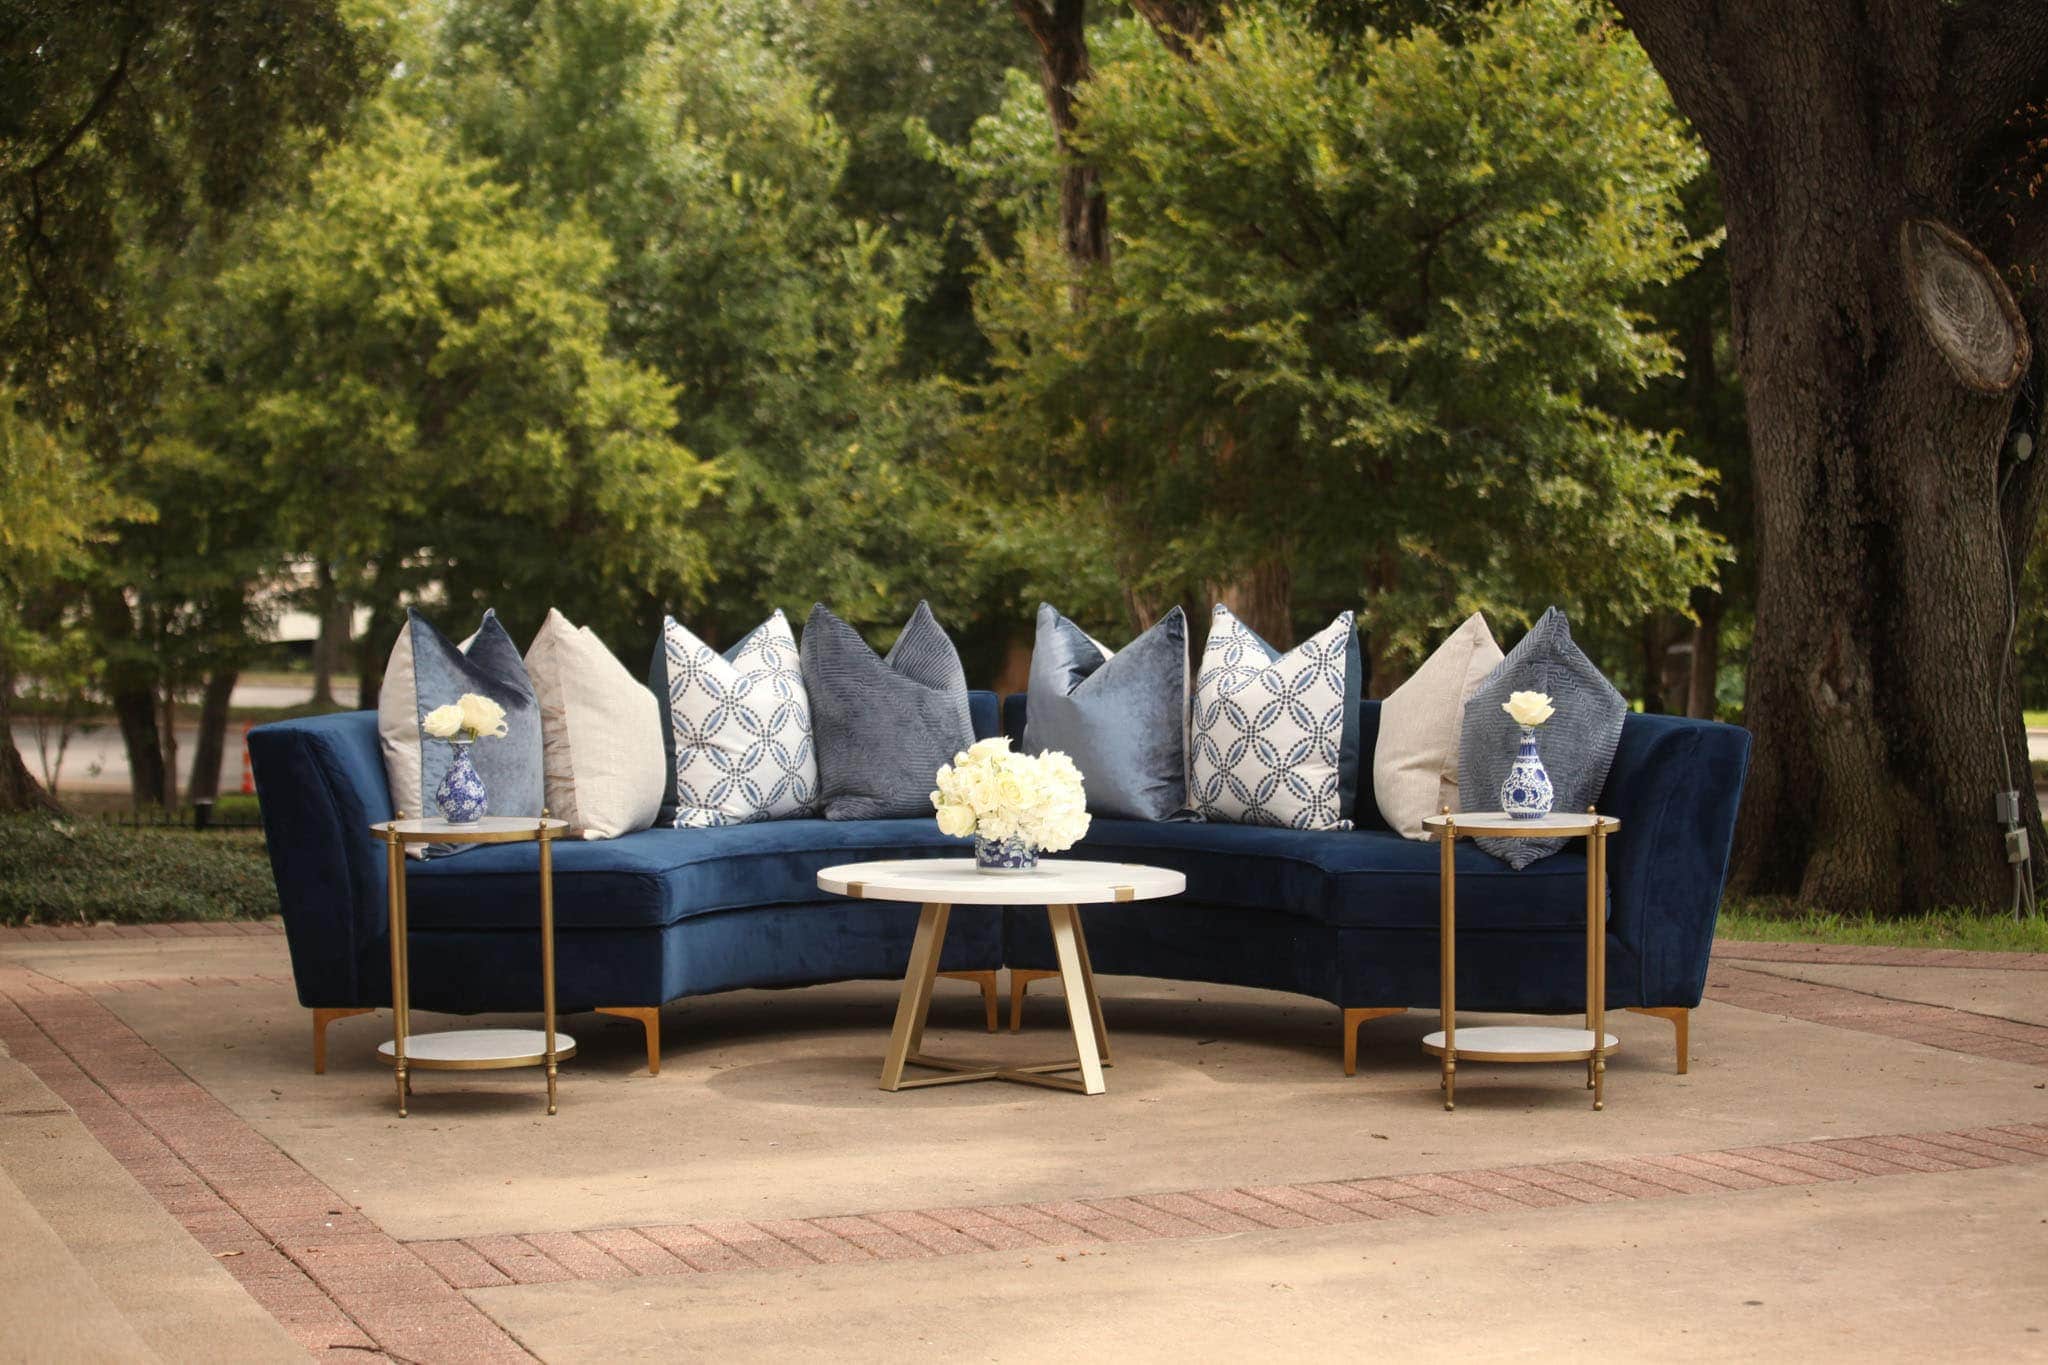 The Luxe Look: Incorporating velvet and leather event rentals into your design scheme